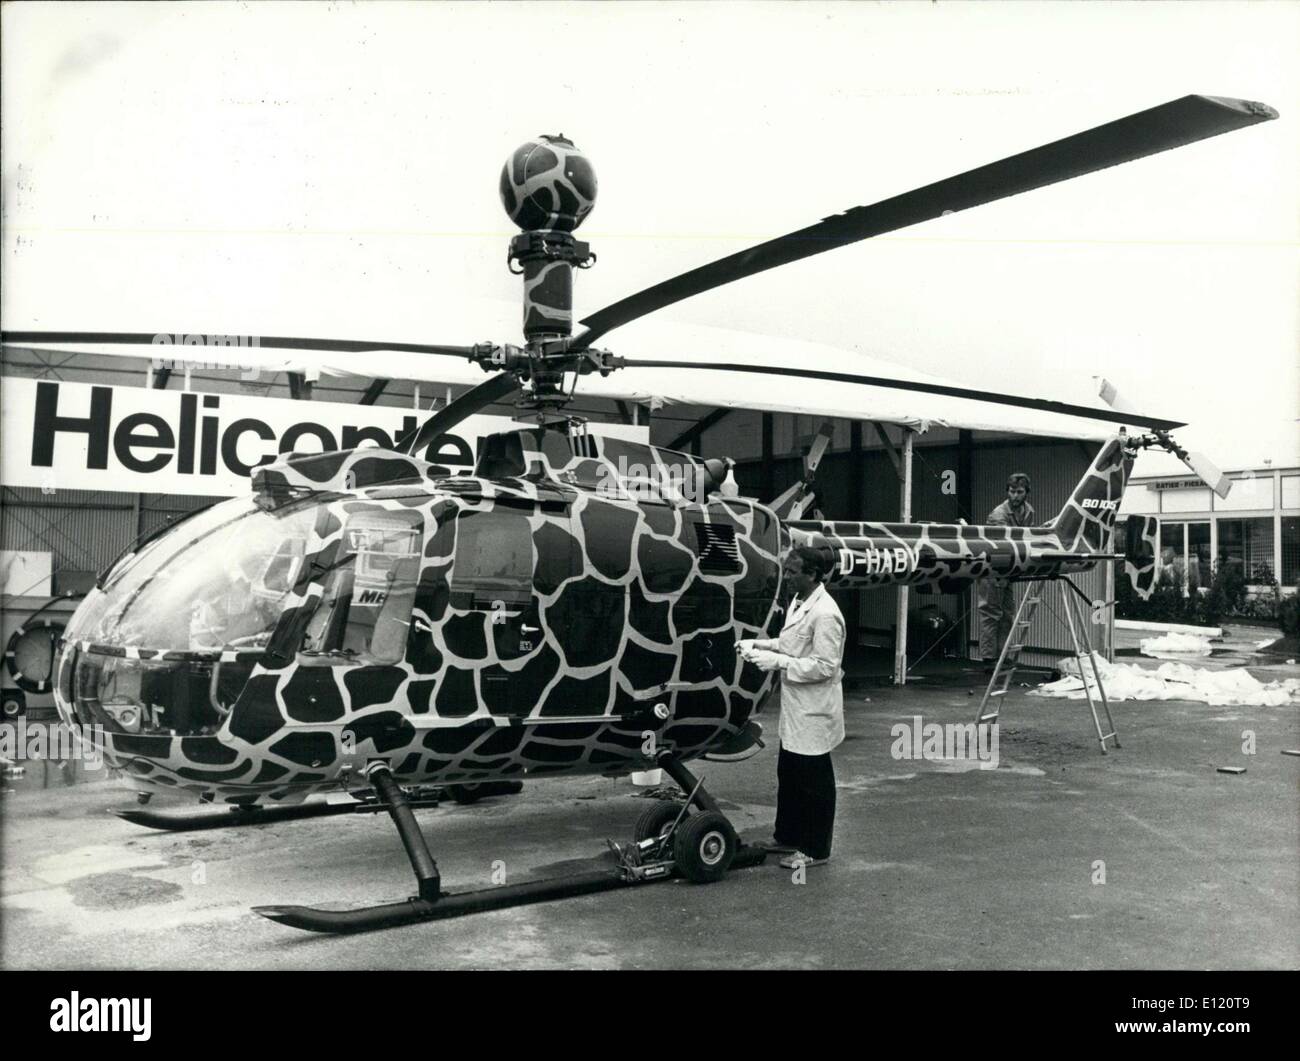 Jun. 04, 1981 - German Helicopter at the Aeronautical Exposition Stock Photo